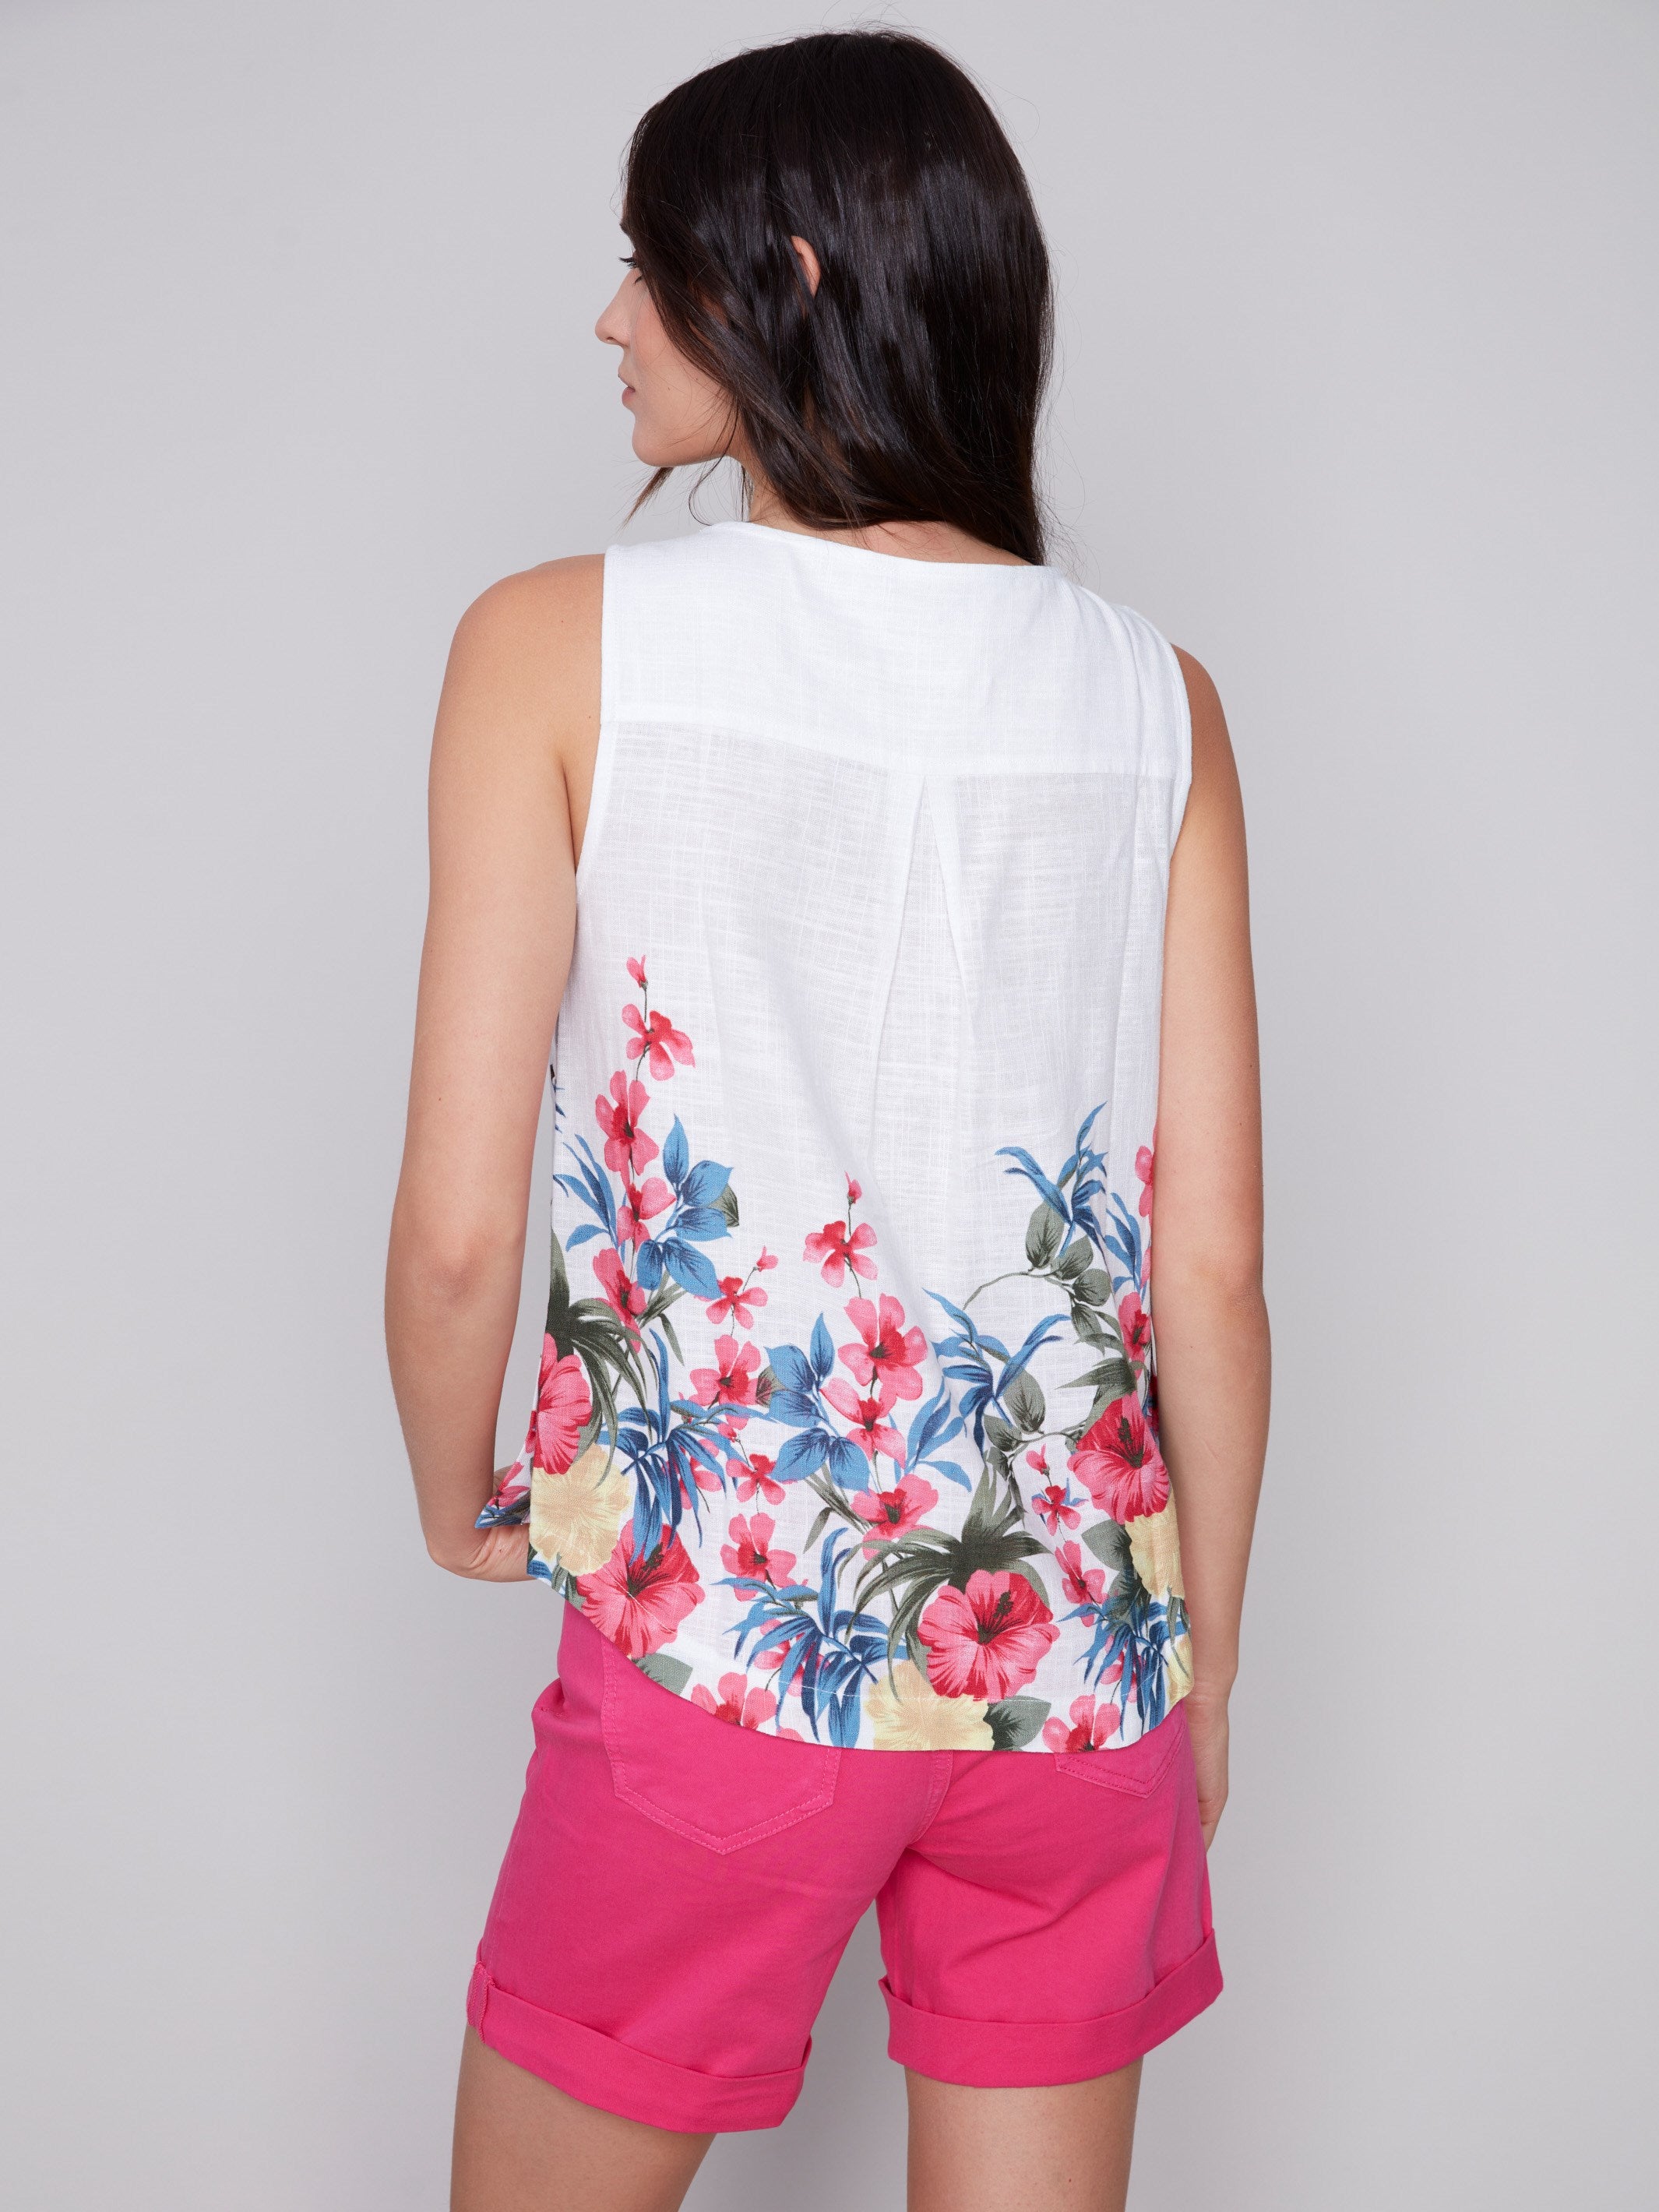 Printed Sleeveless Top with Side Buttons - Maui - Charlie B Collection Canada - Image 2